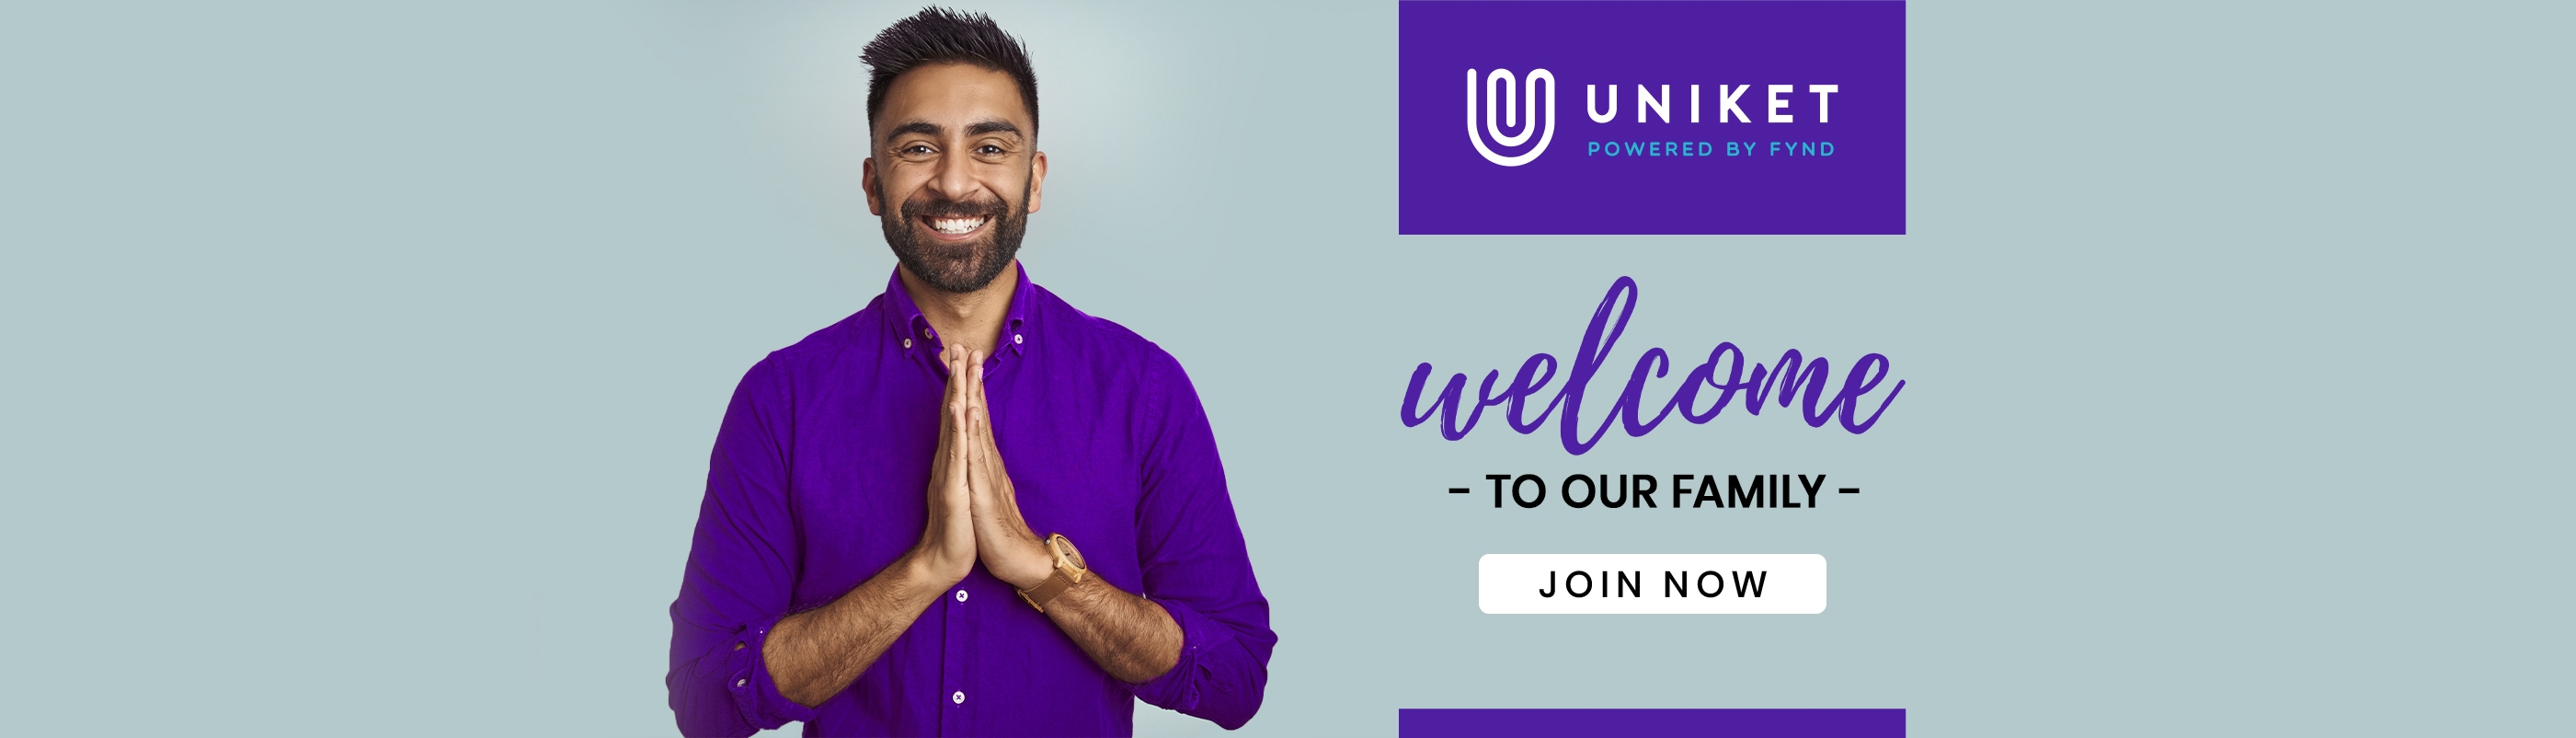 Uniket Partners welcome banner